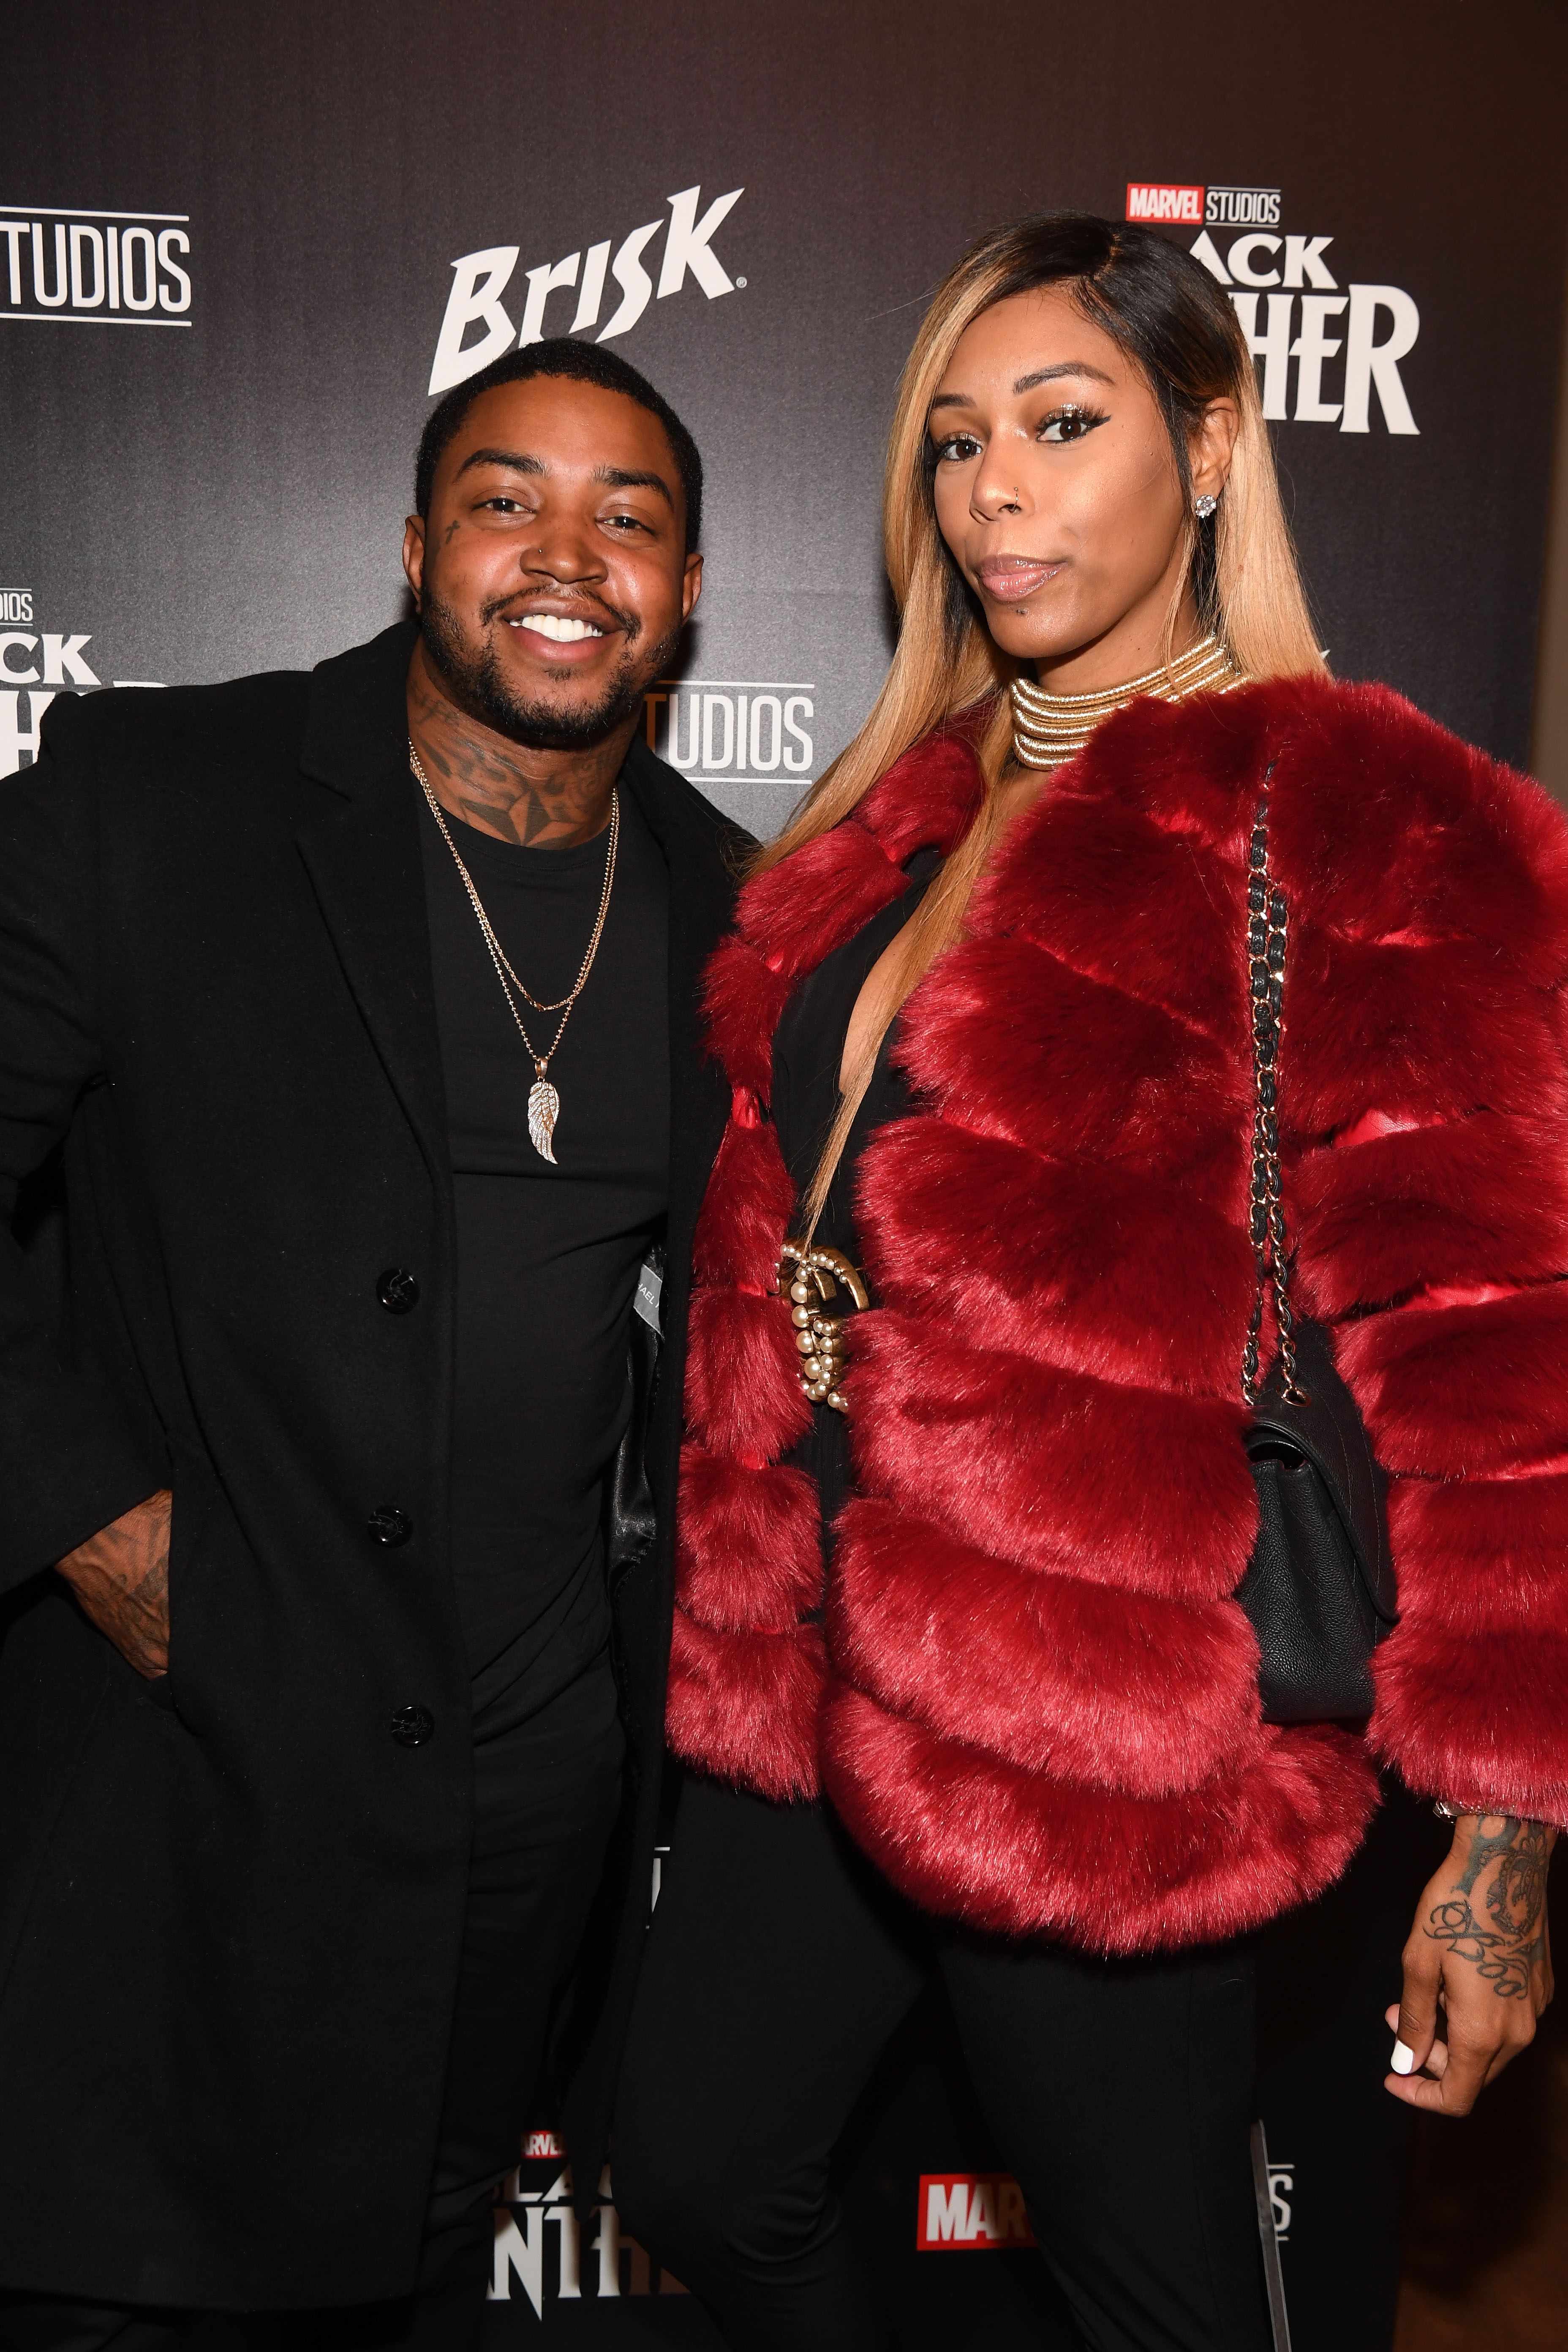 Rapper Lil Scrappy and Adiz 'Bambi' Benson at the advanced screening and panel discussion for "Black Panther" on February 14, 2018. | Source: Getty Images